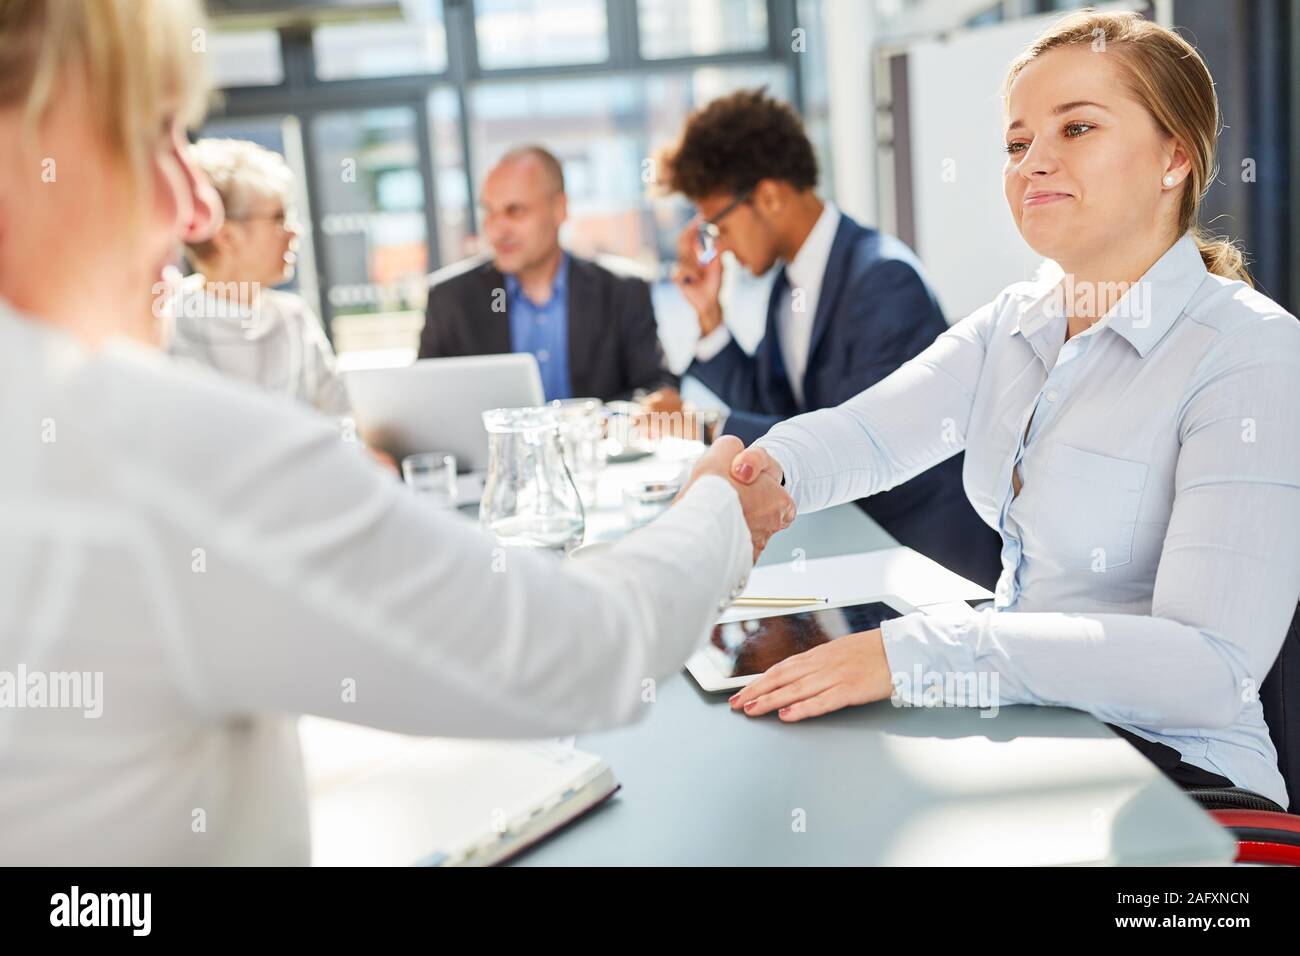 Two businesswomen handshaking in a negotiation or meeting Stock Photo